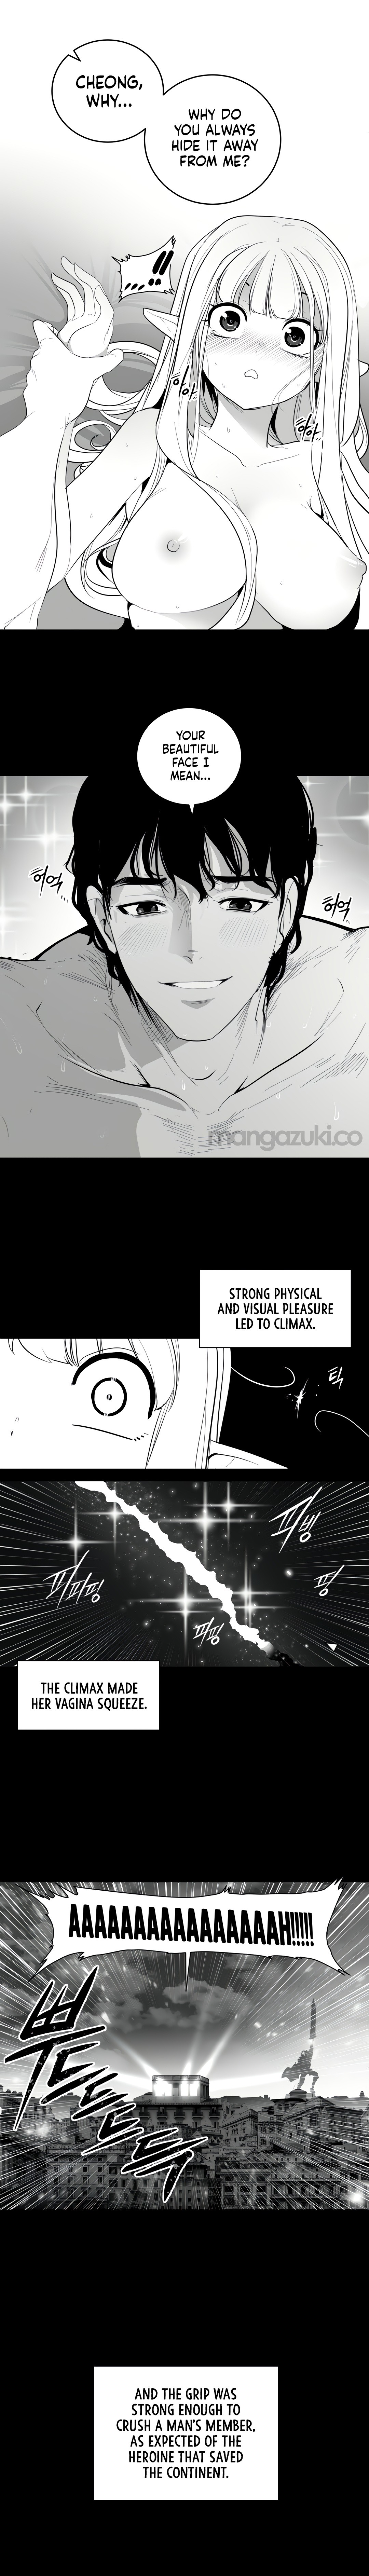 What Happens Inside the Dungeon Chapter 111 - HolyManga.net